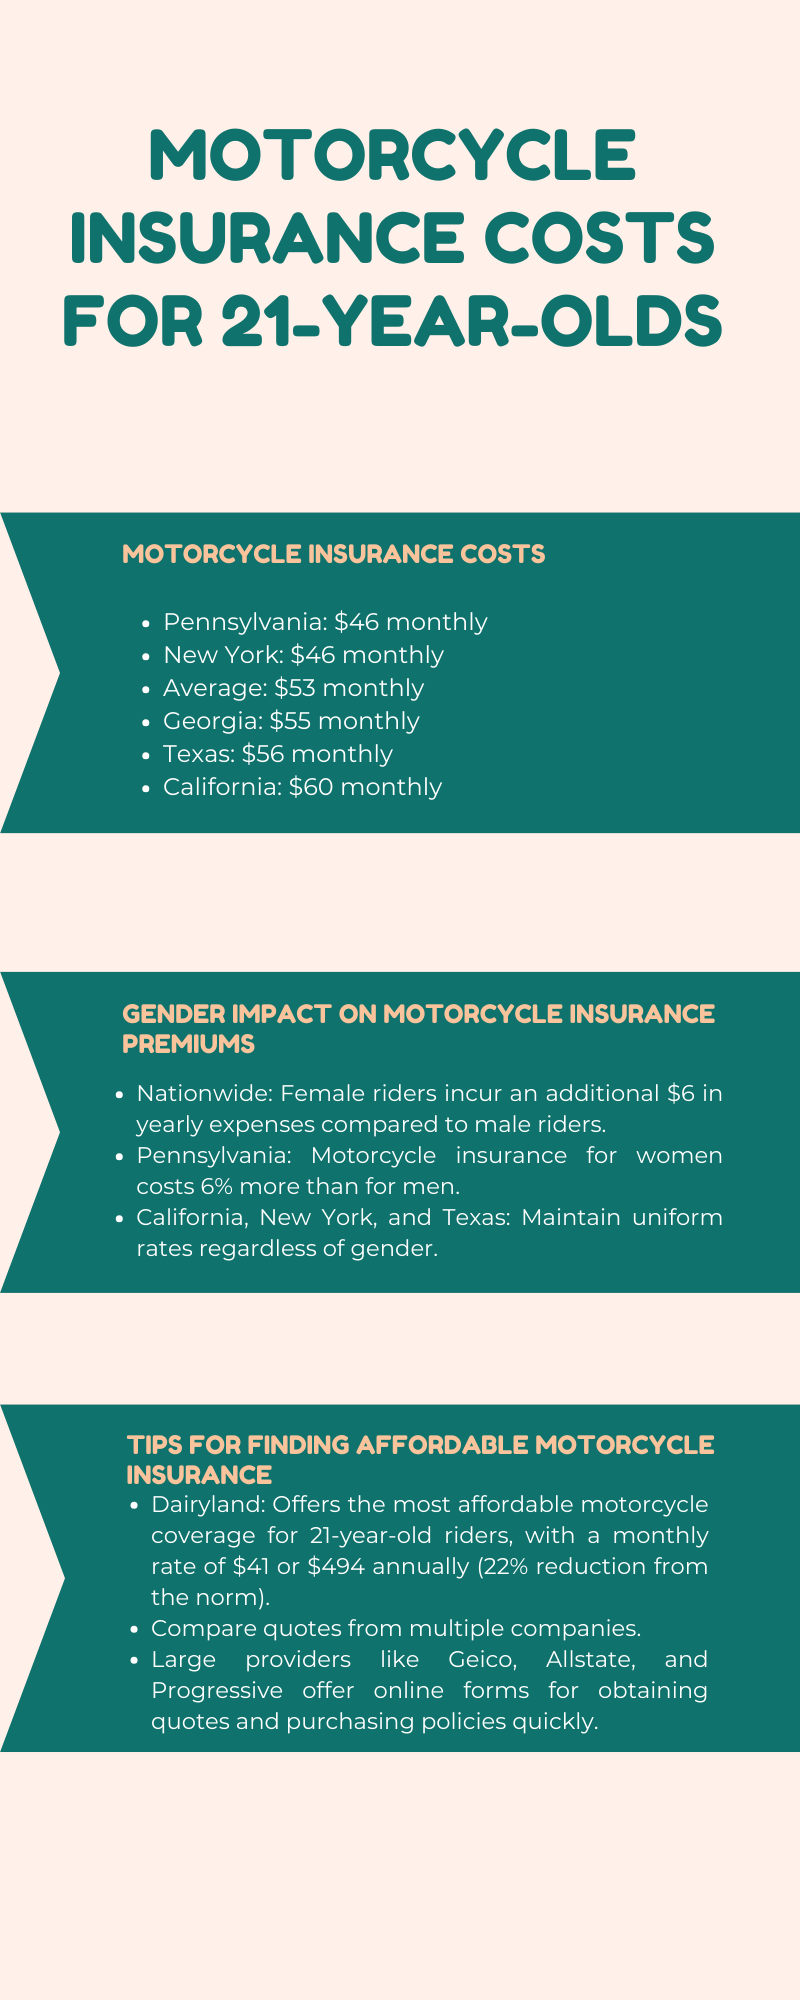 An infographic illustration of Motorcycle Insurance Costs for 21-Year-Olds Across States